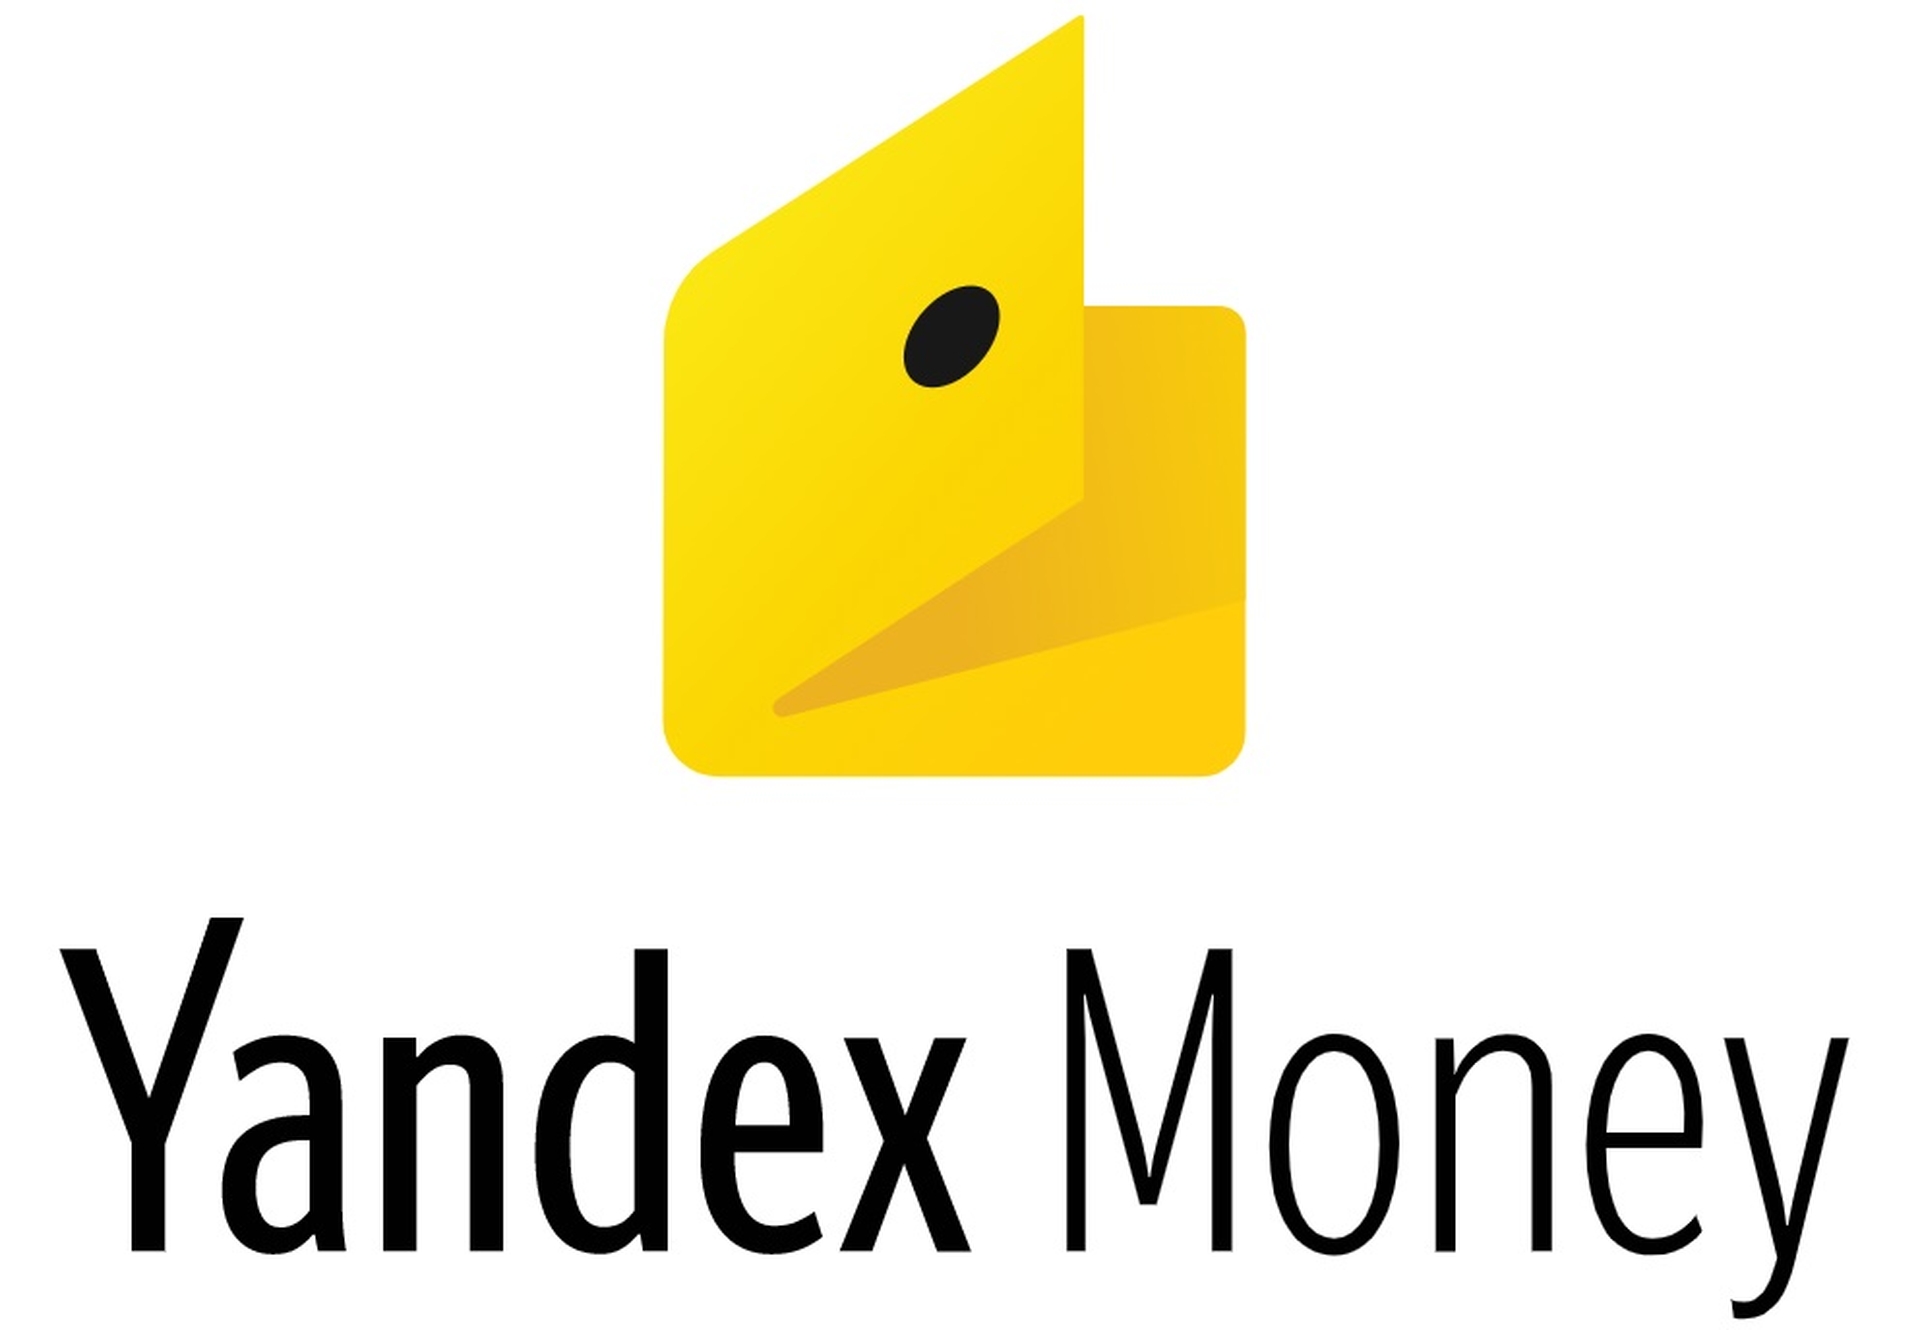 In this article, we are going to cover how to buy Bitcoin with Yandex Money, so you can utilize this service while making your next Bitcoin purchase.